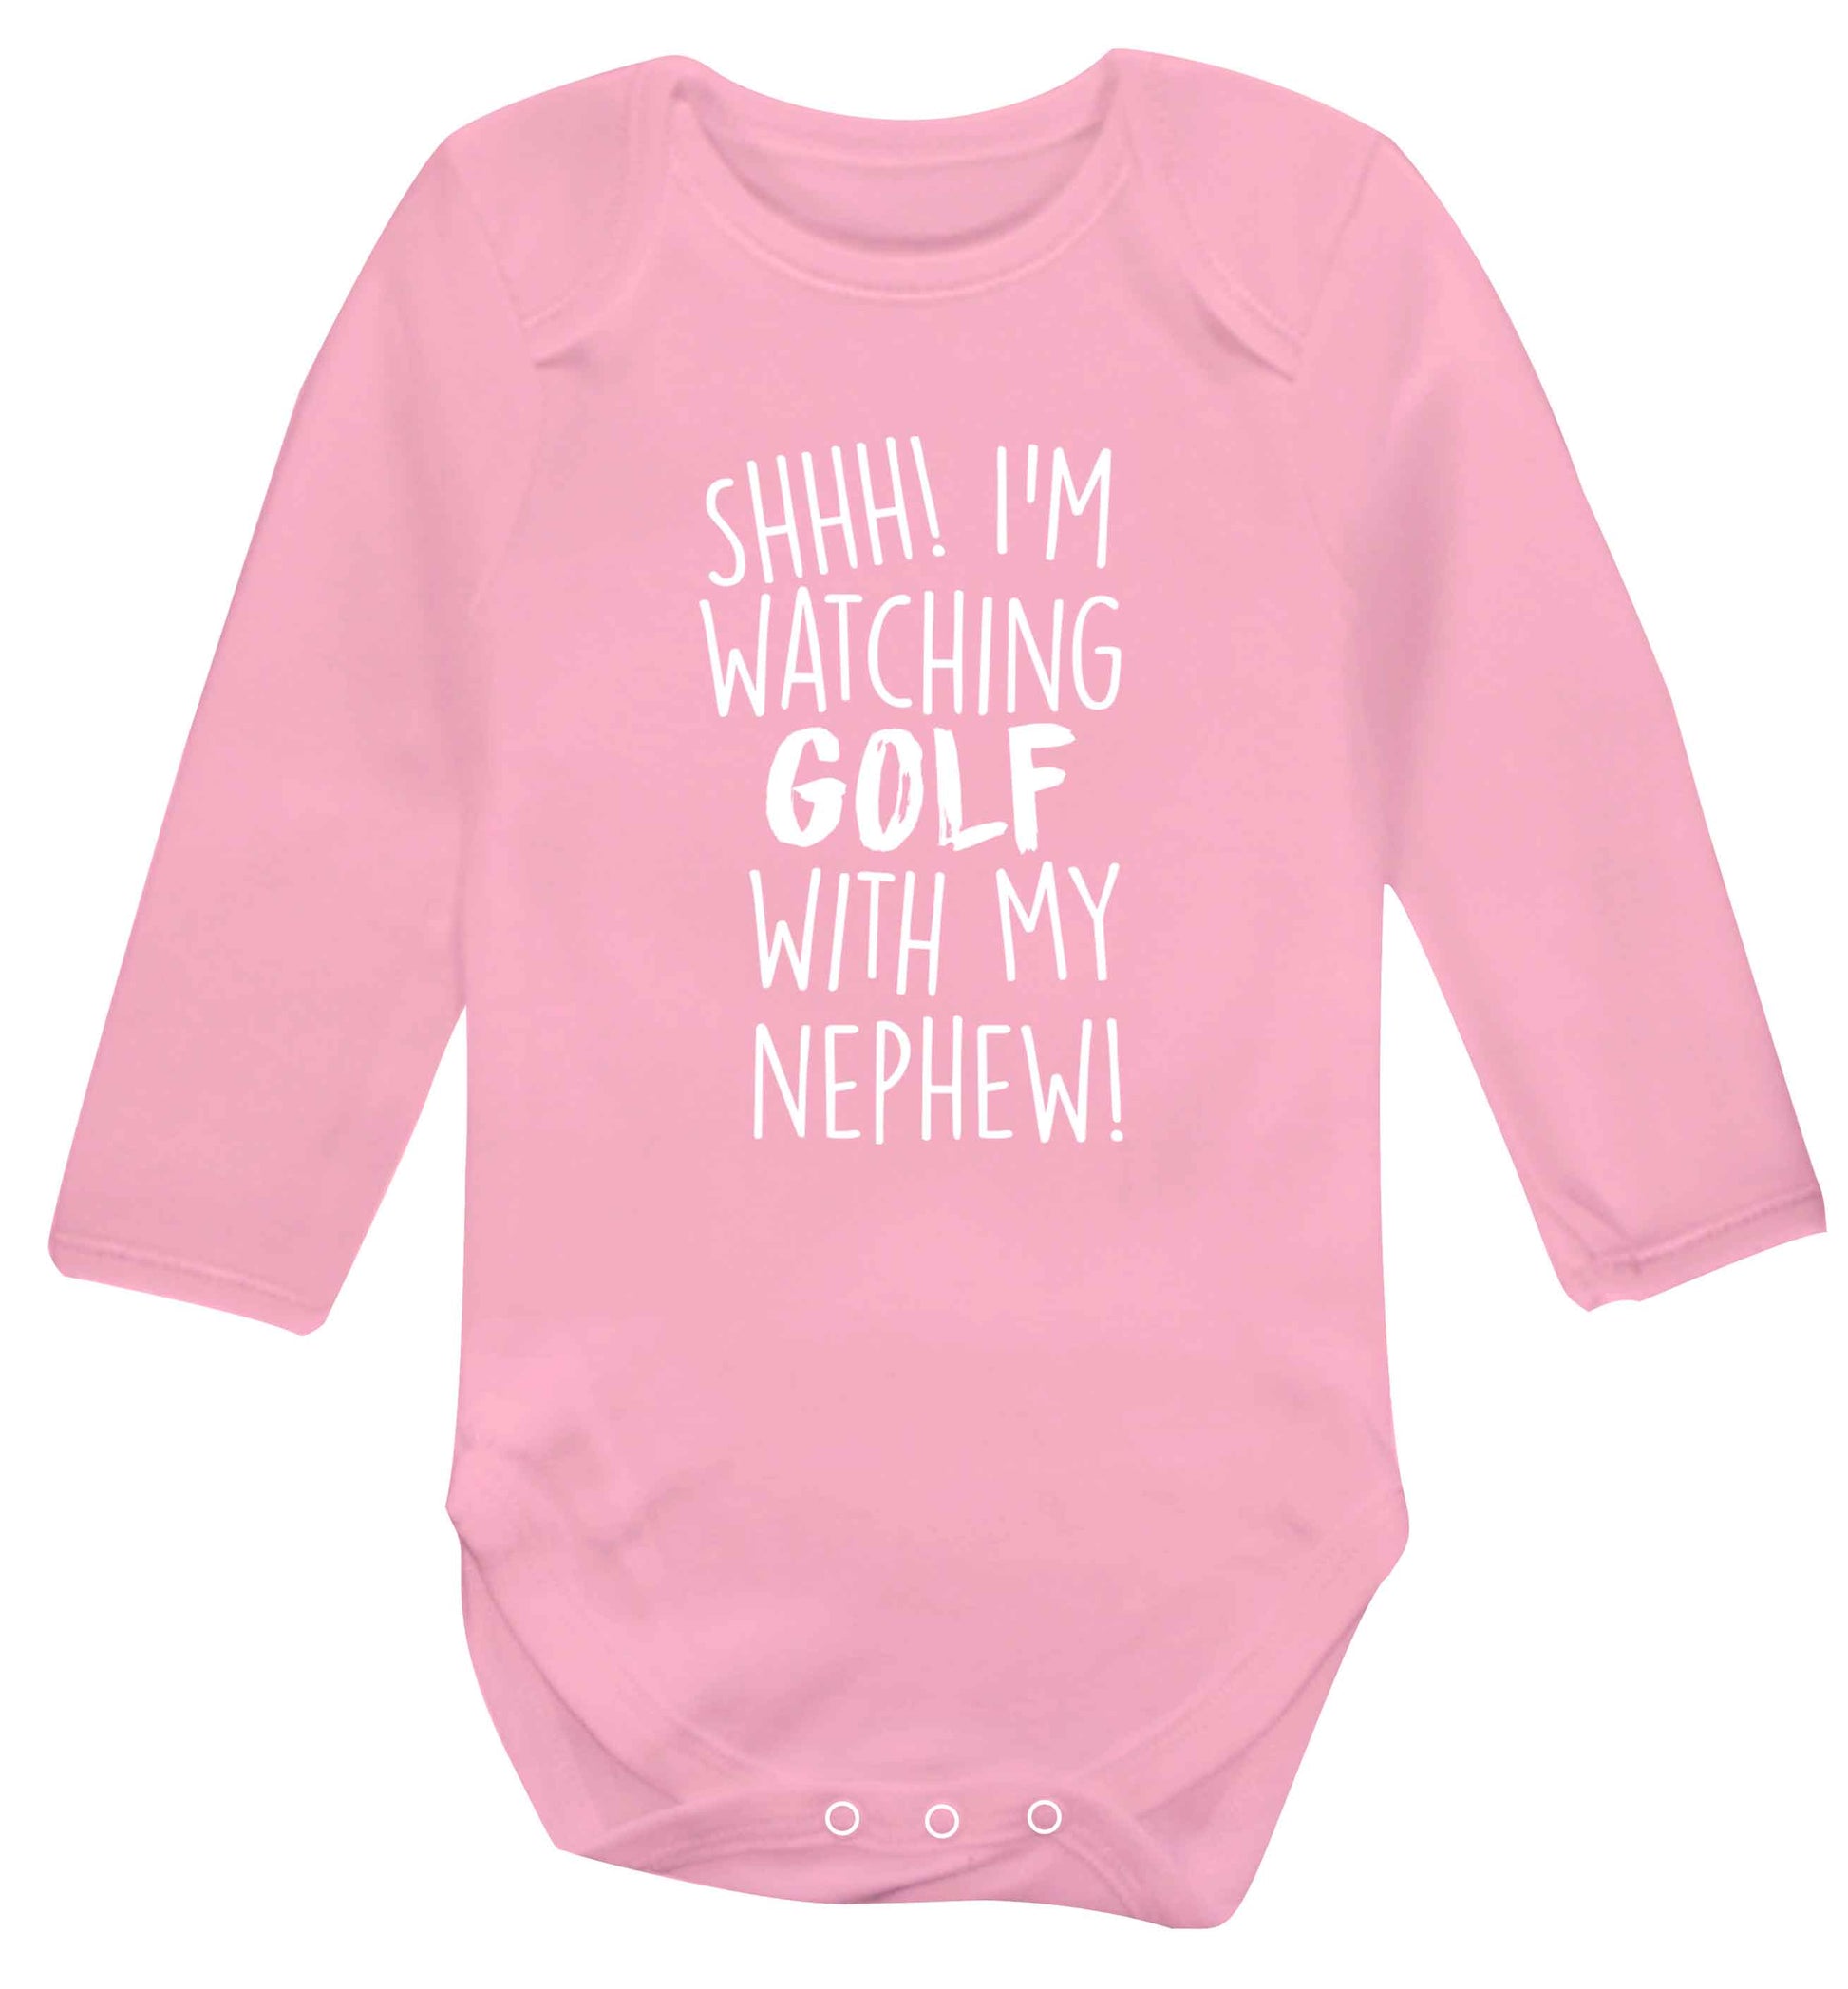 Shh I'm watching golf with my nephew Baby Vest long sleeved pale pink 6-12 months